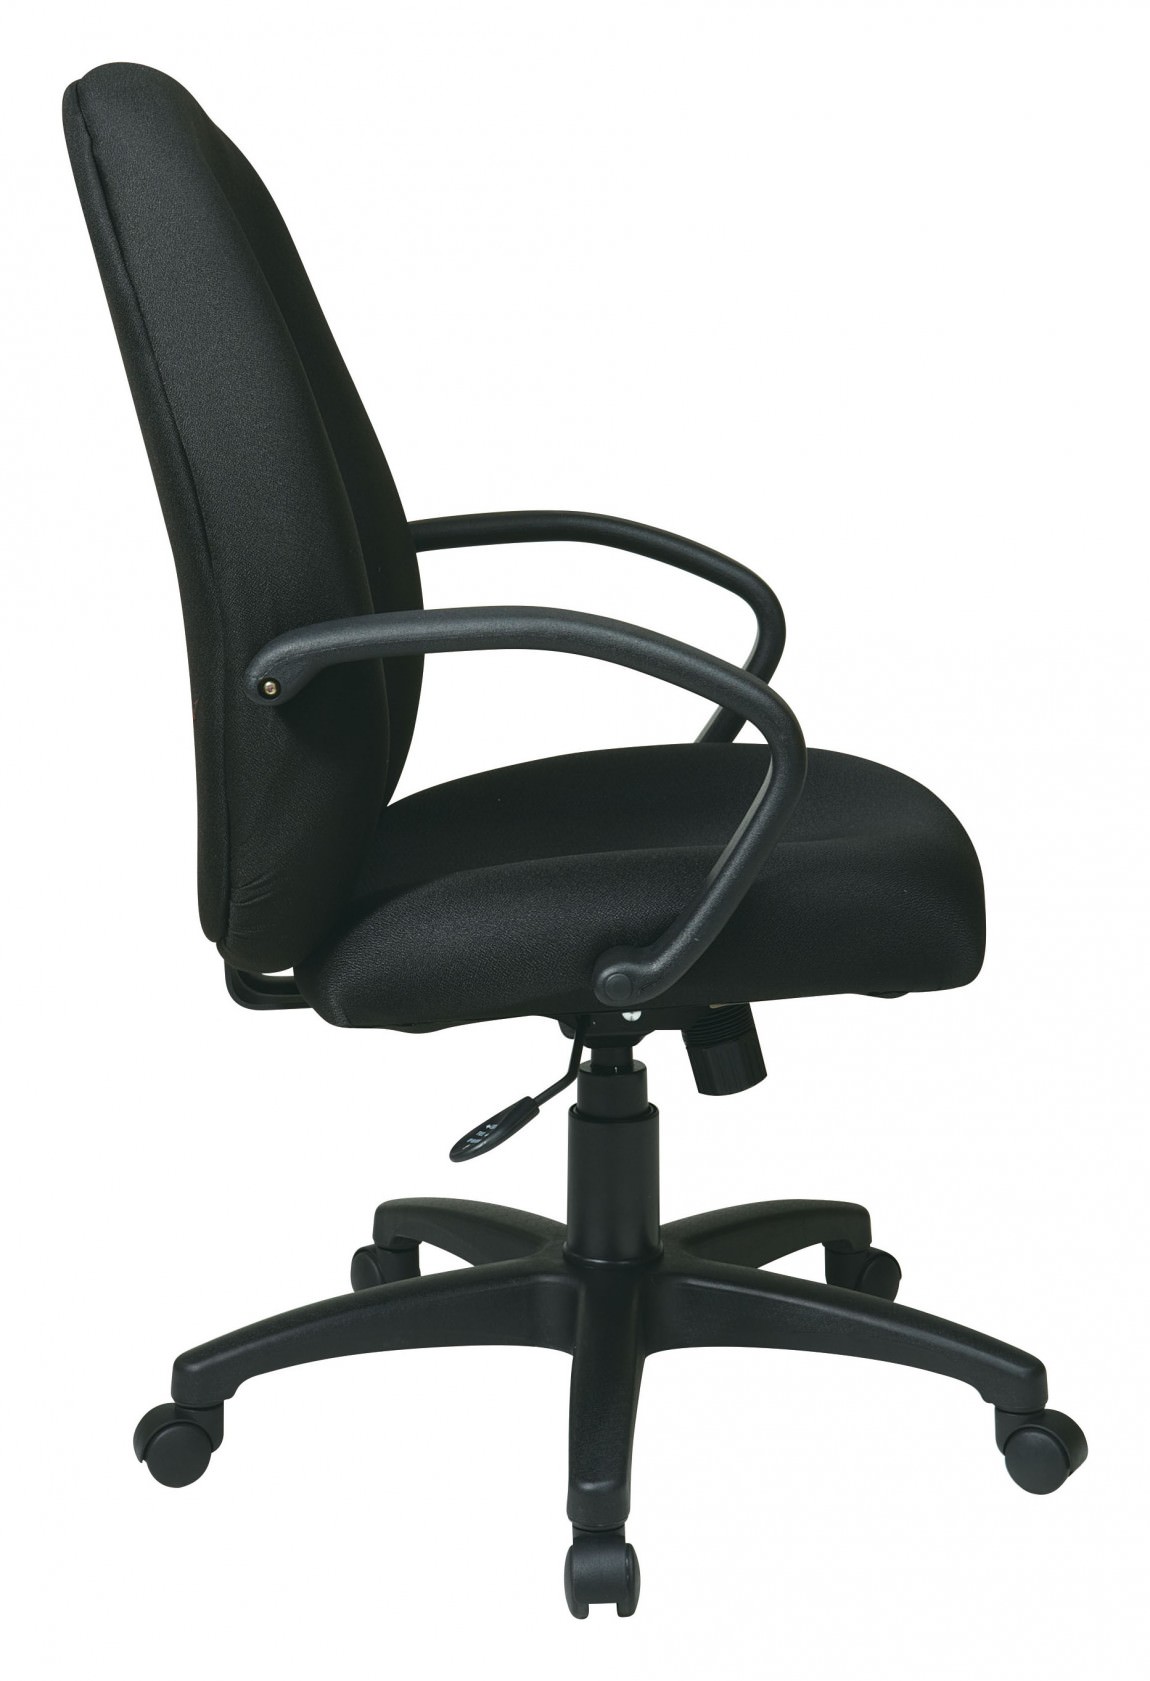 Low Back Office Chair - Black - Work Smart by Office Star Products